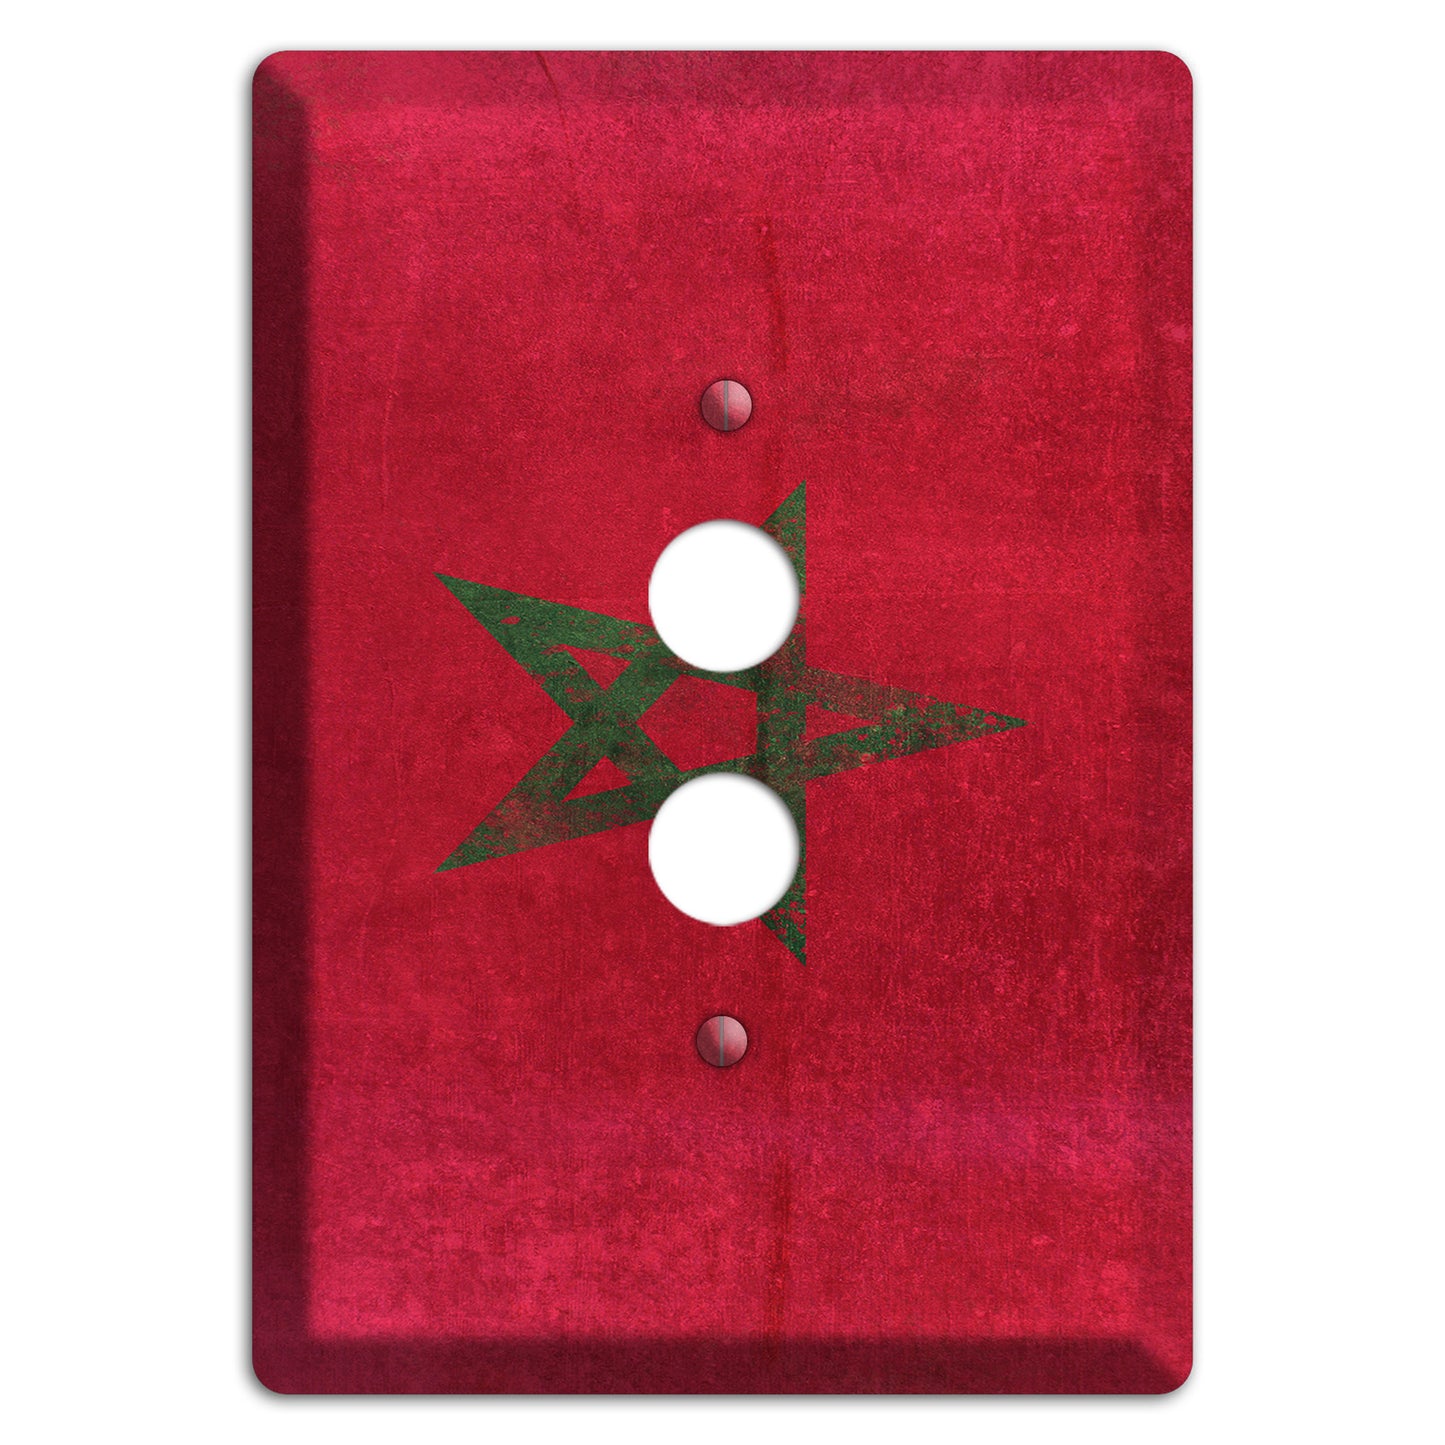 Morocco Cover Plates 1 Pushbutton Wallplate